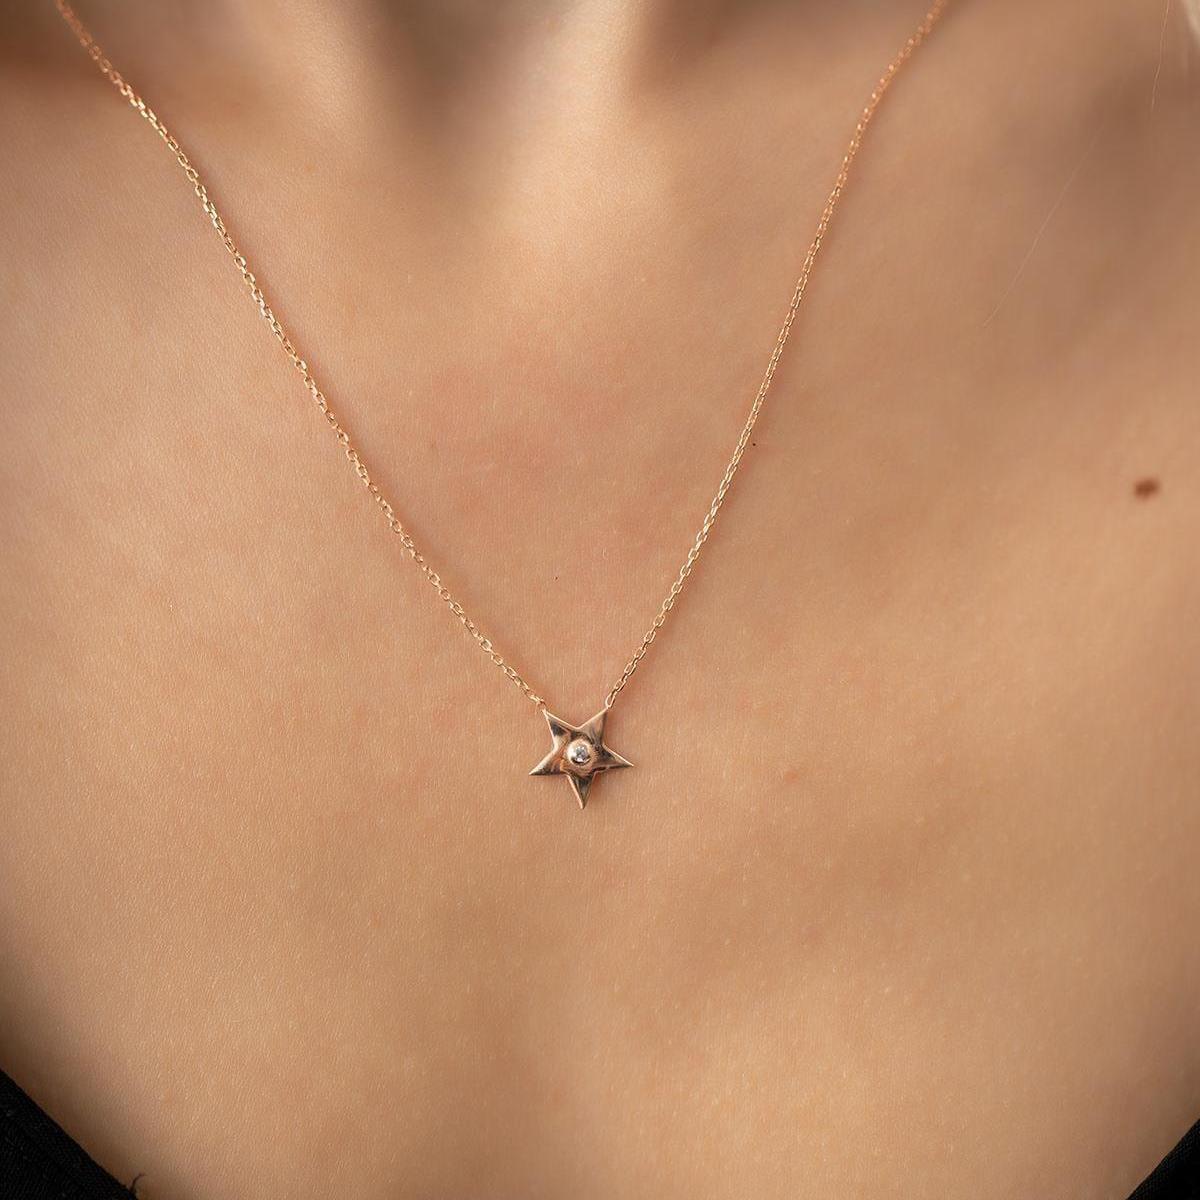 Star Necklace Rose • Star Necklace Silver • Star Sign Necklace - Trending Silver Gifts